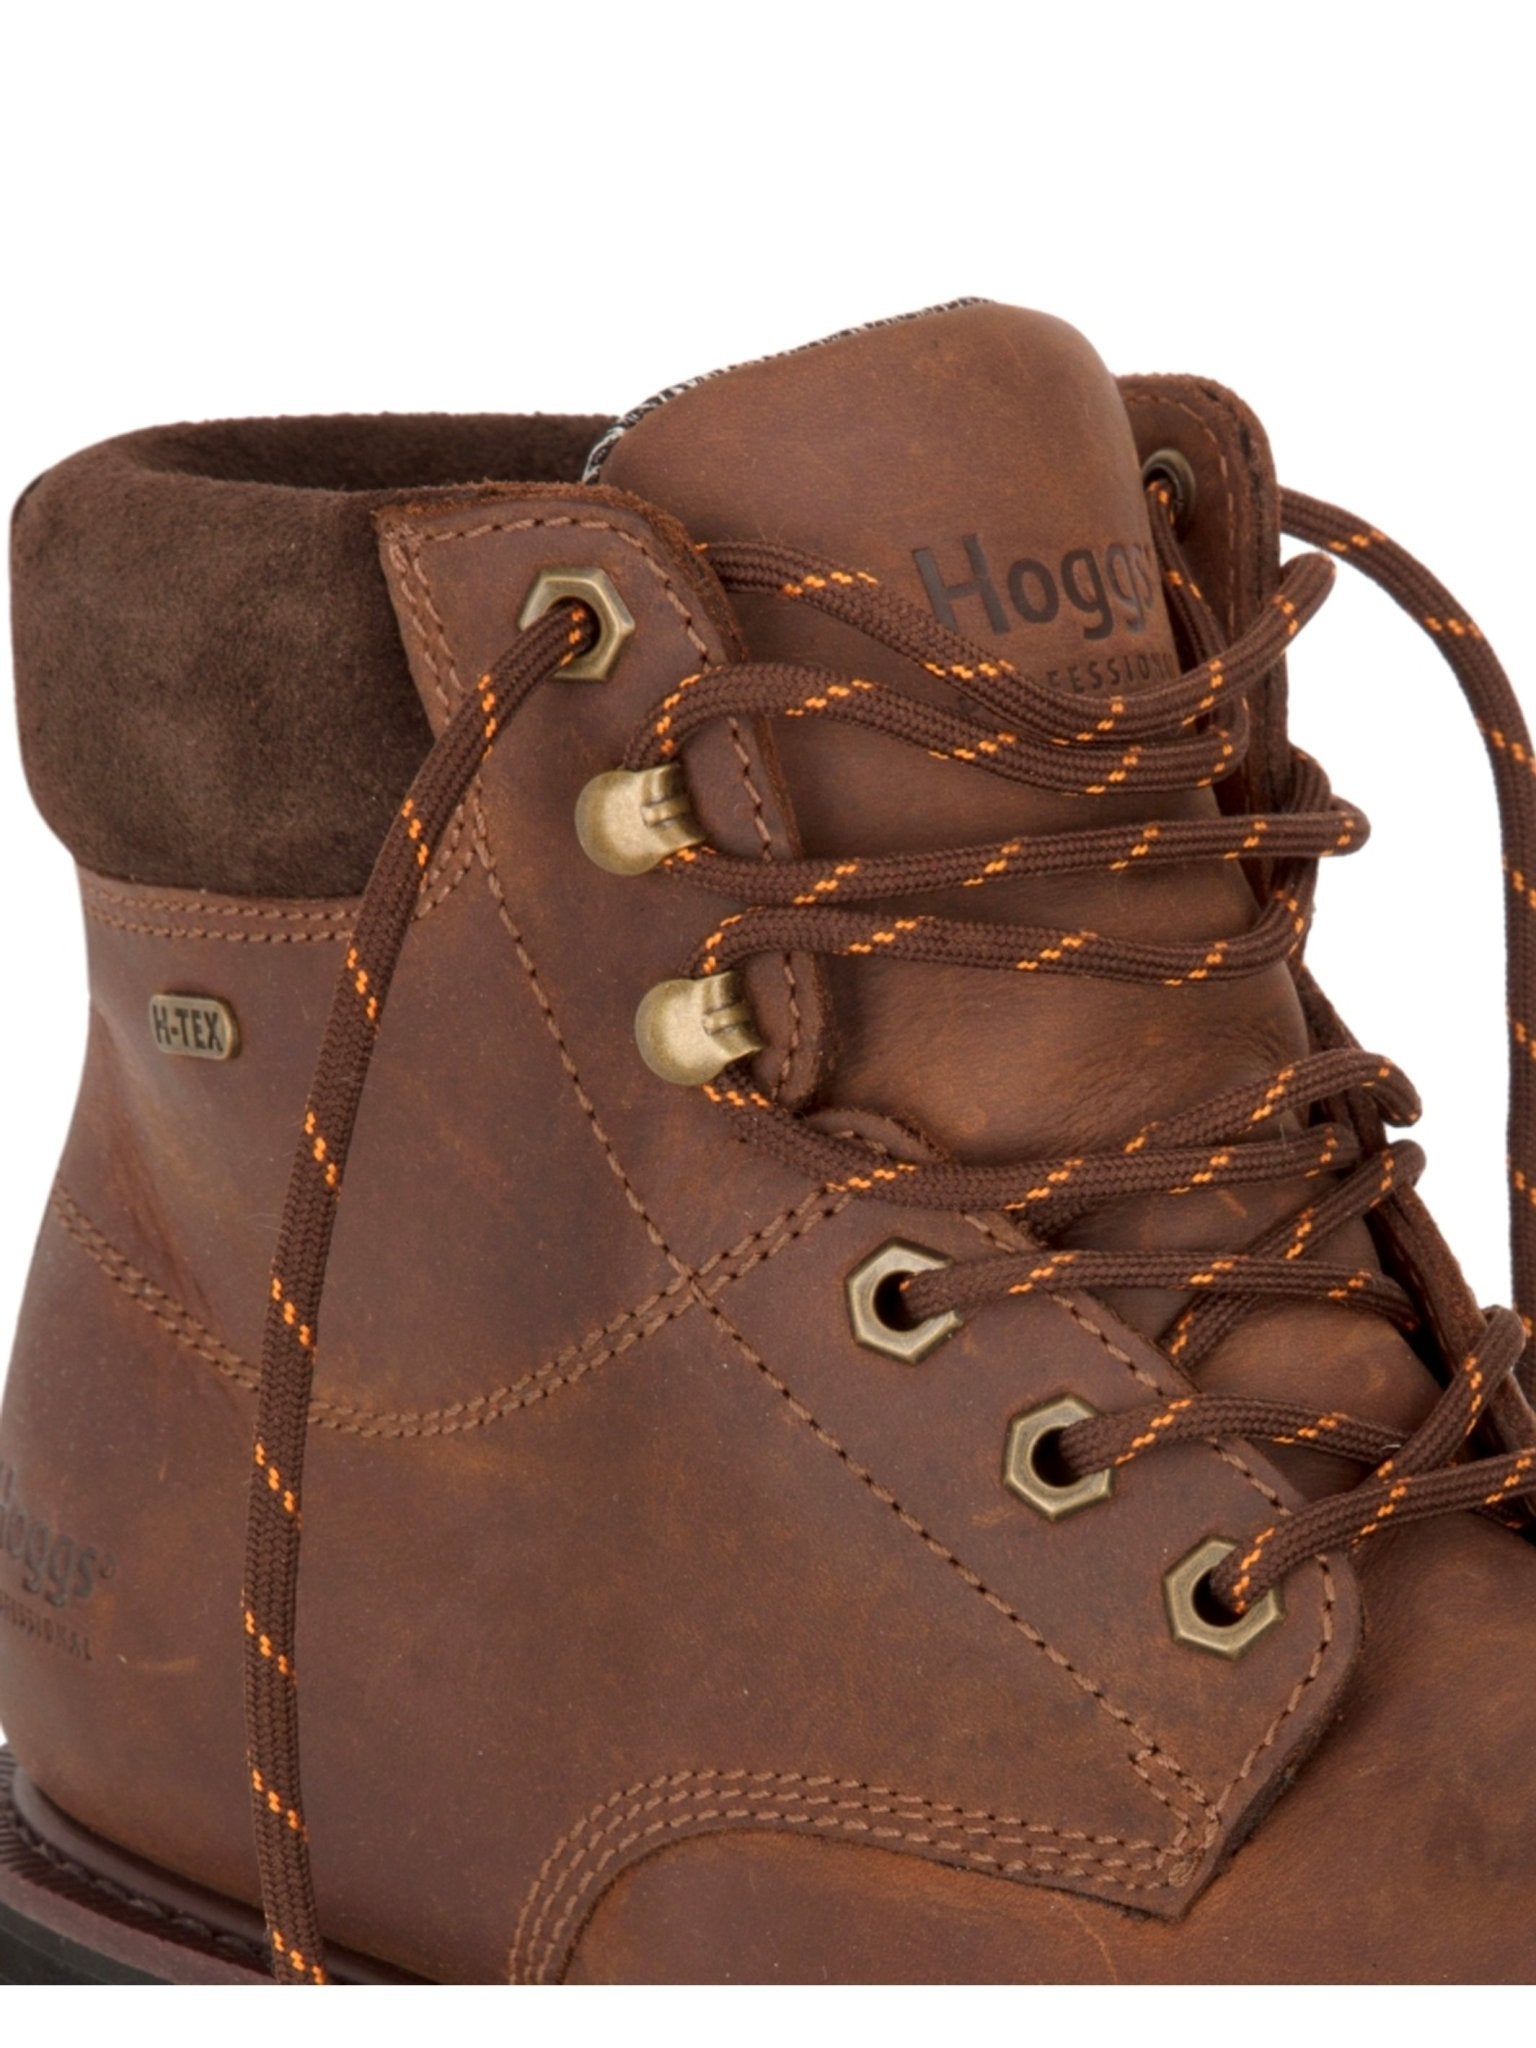 Hoggs of Fife Hoggs of Fife - Cronos Waterproof Mens boot - Mens Waterproof Leather Boots - Lace up Safety Footwear